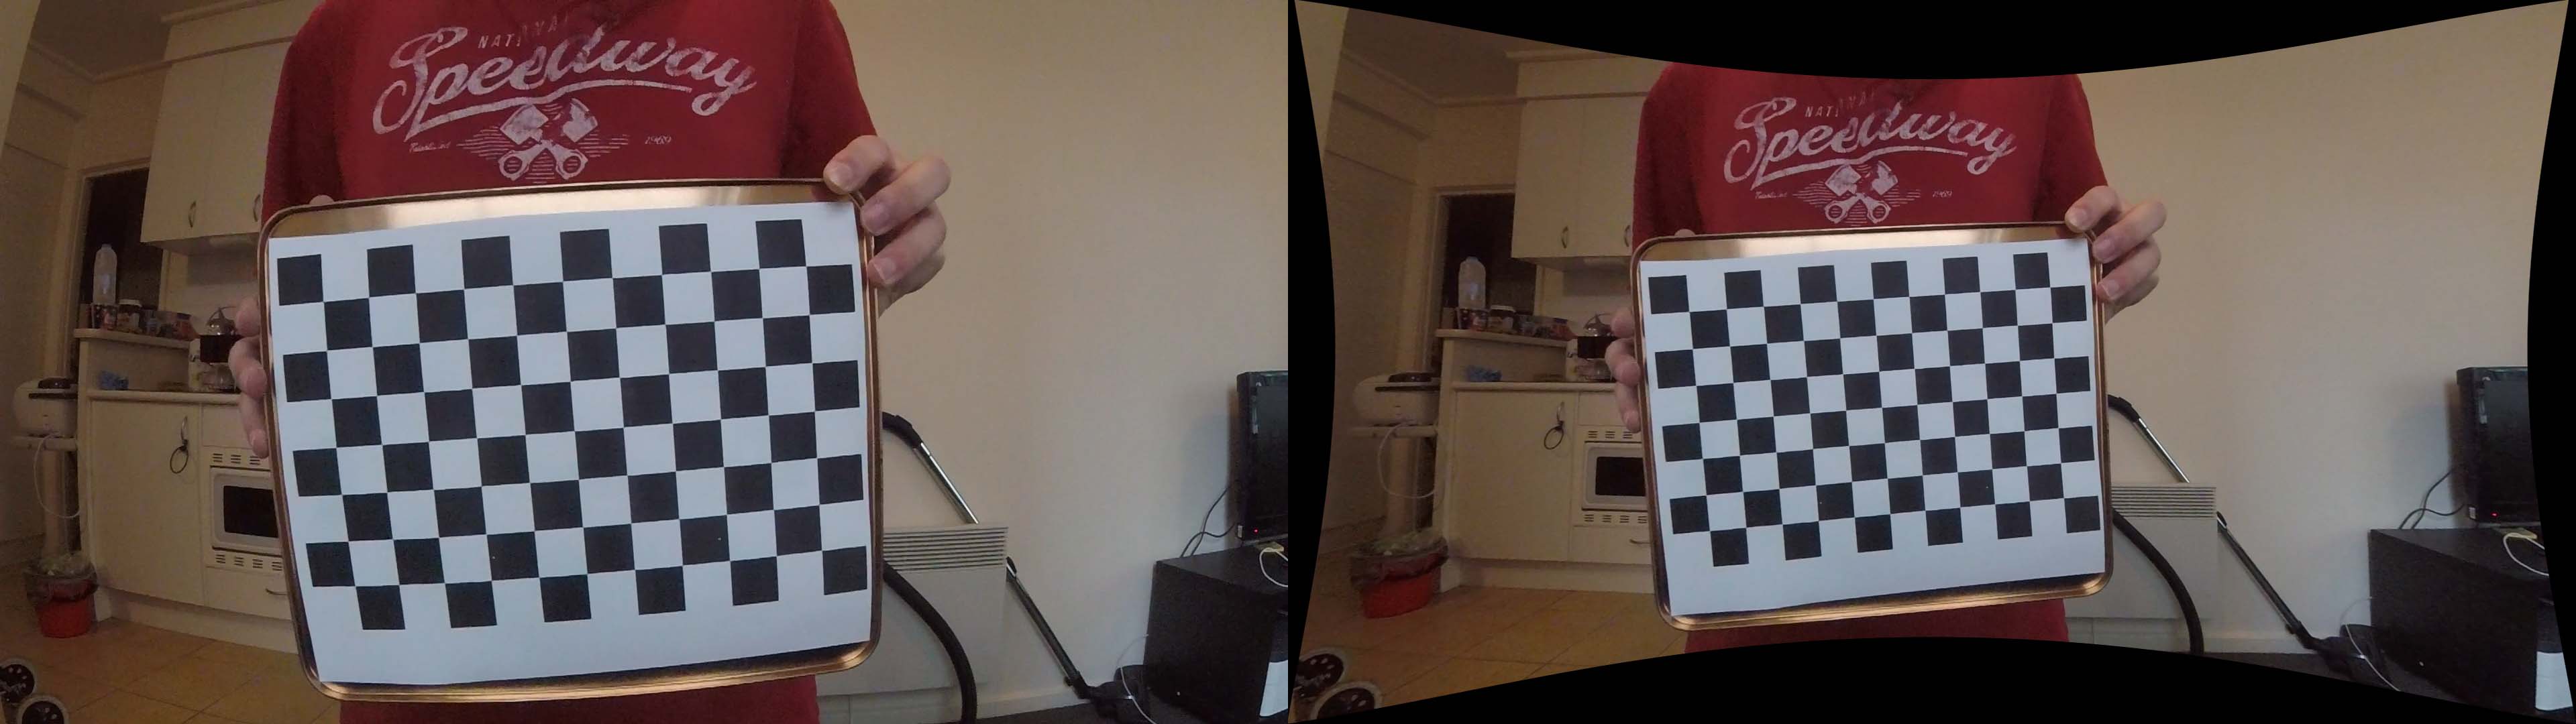 Image distortion of a GoPro